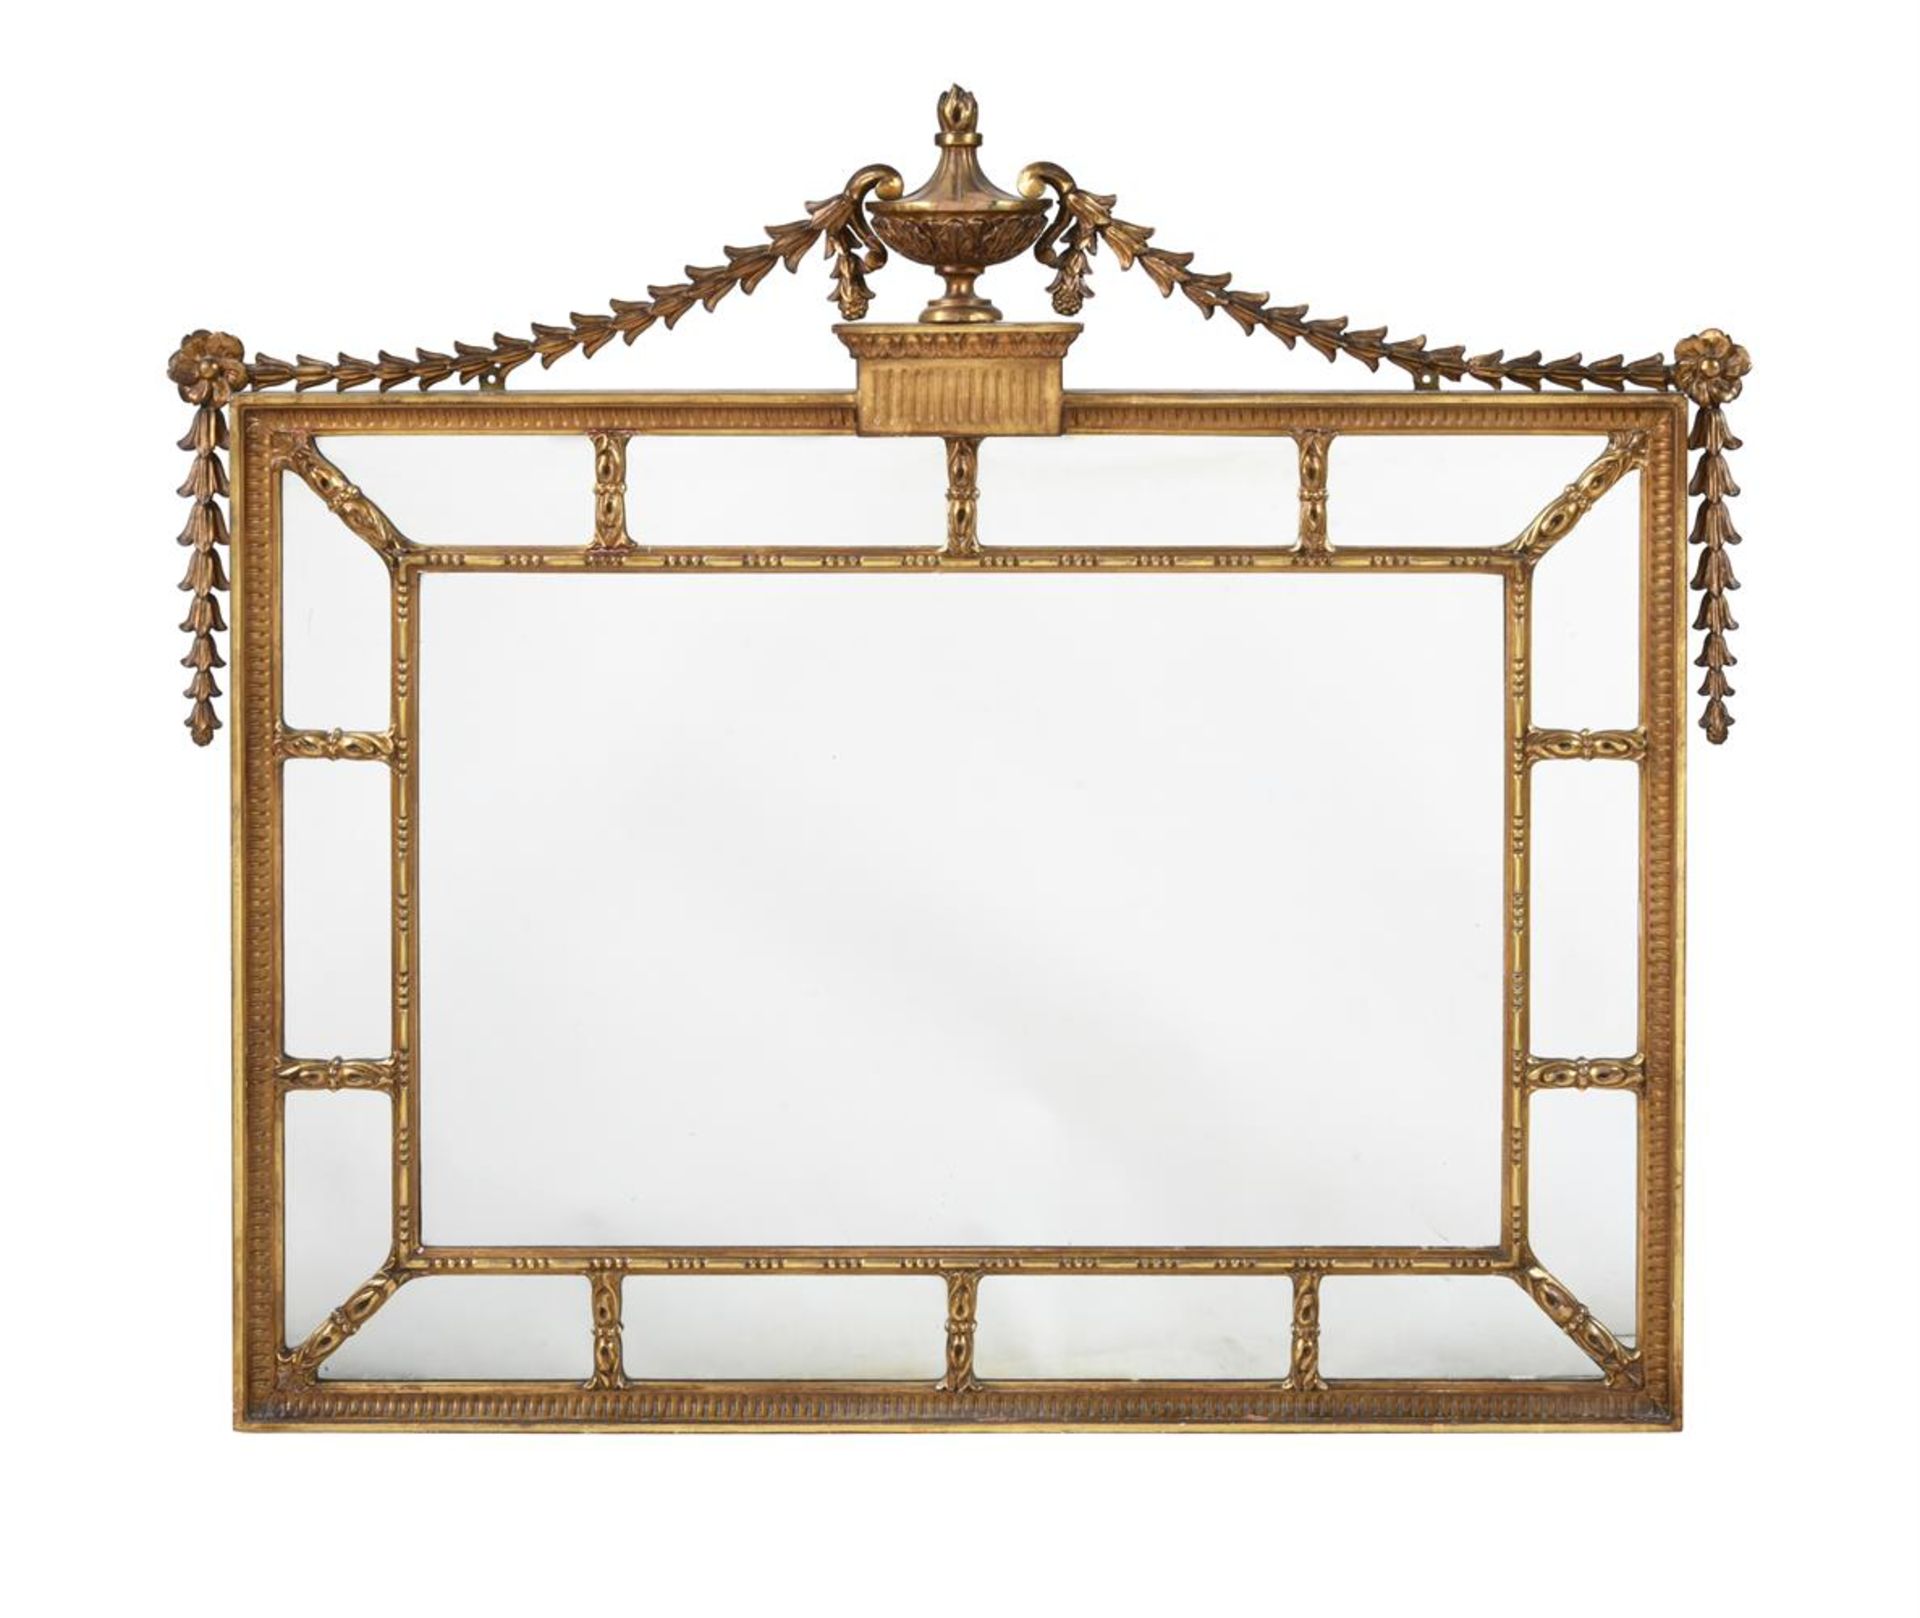 A GILTWOOD WALL MIRROR IN GEORGE III STYLE, EARLY 20TH CENTURY